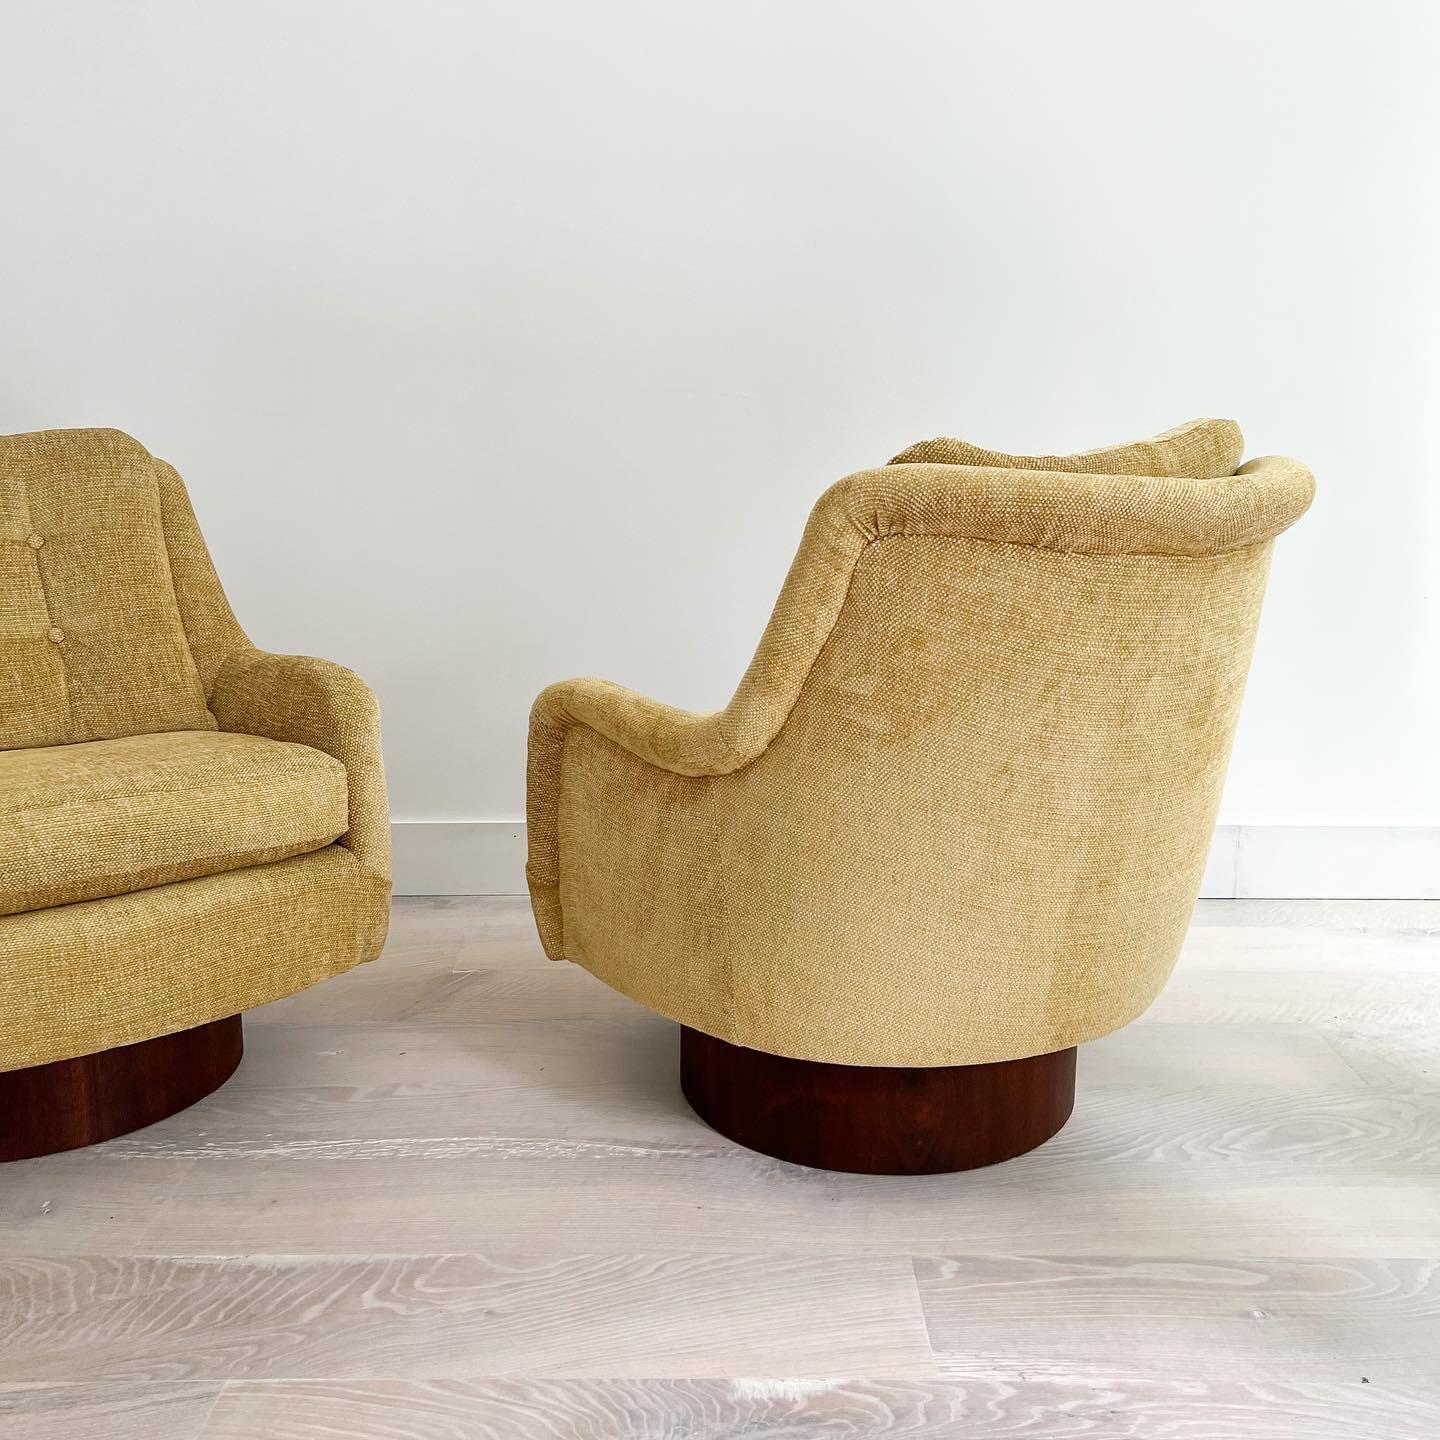 Pair of Mid-Century Modern swivel rockers with new golden yellow chenille upholstery. Attributed to Adrian Pearsall - The base construction is very similar to other Adrian Pearsall chairs we’ve had in the past. These chairs swivel and rock with